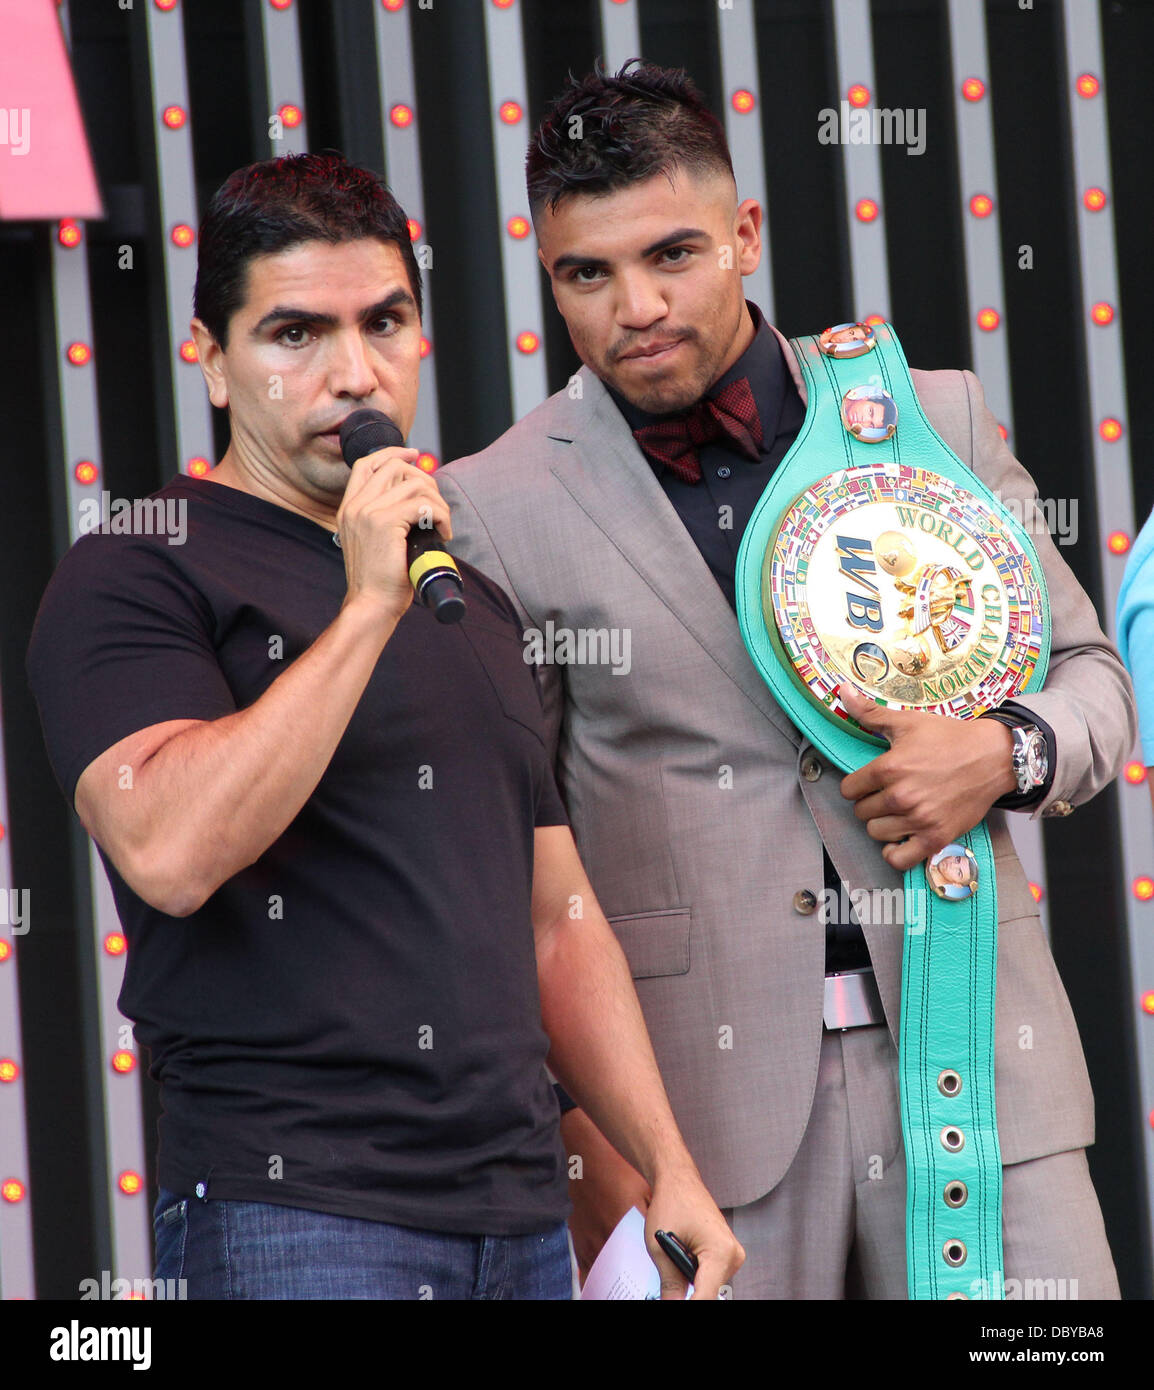 Victor Ortiz 'Star Power' star-studded photo-op featuring all pay-per-view fighters Universal City, California - 12.09.11 Stock Photo